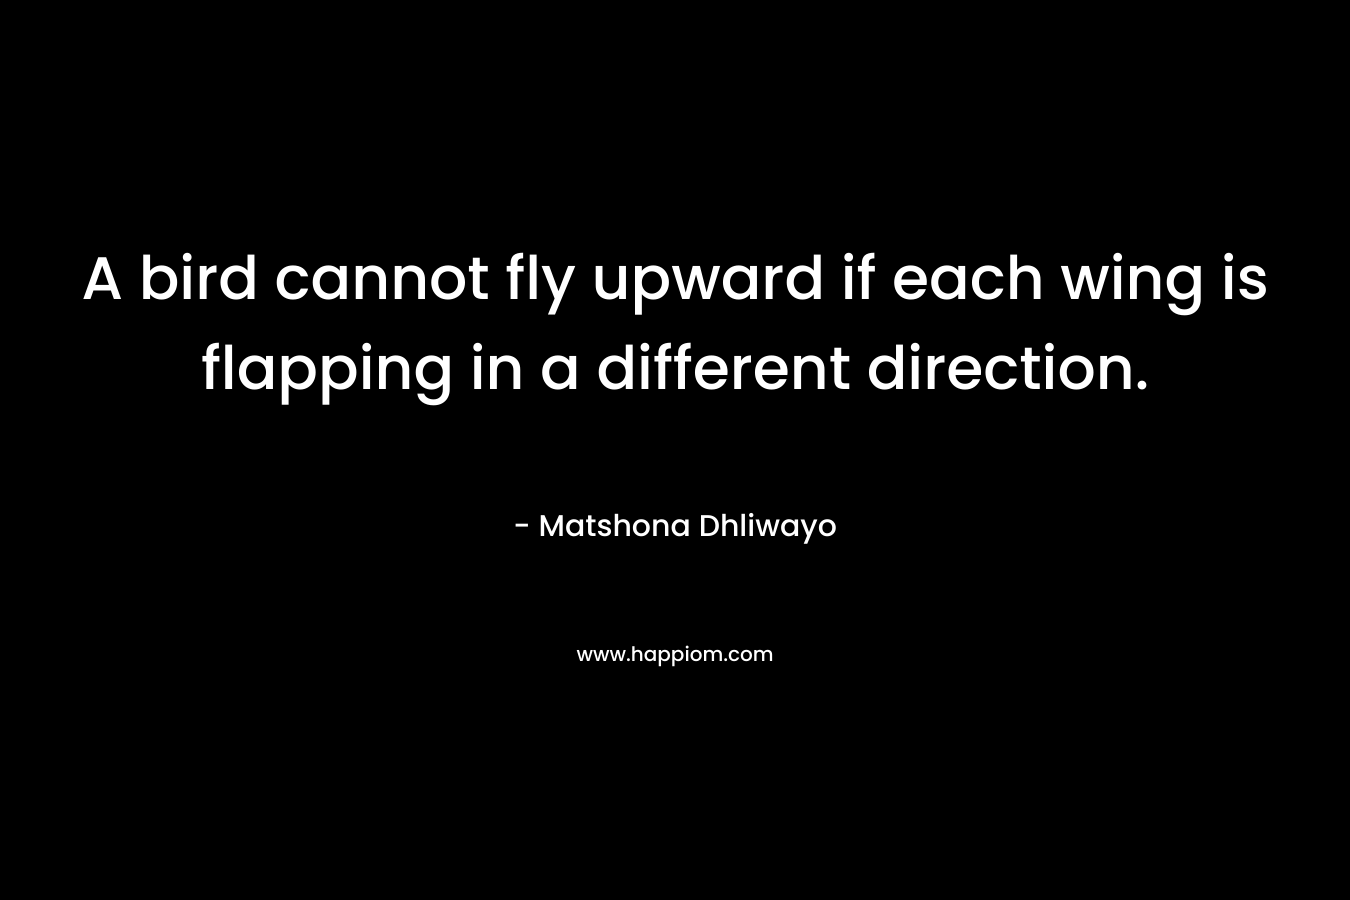 A bird cannot fly upward if each wing is flapping in a different direction.